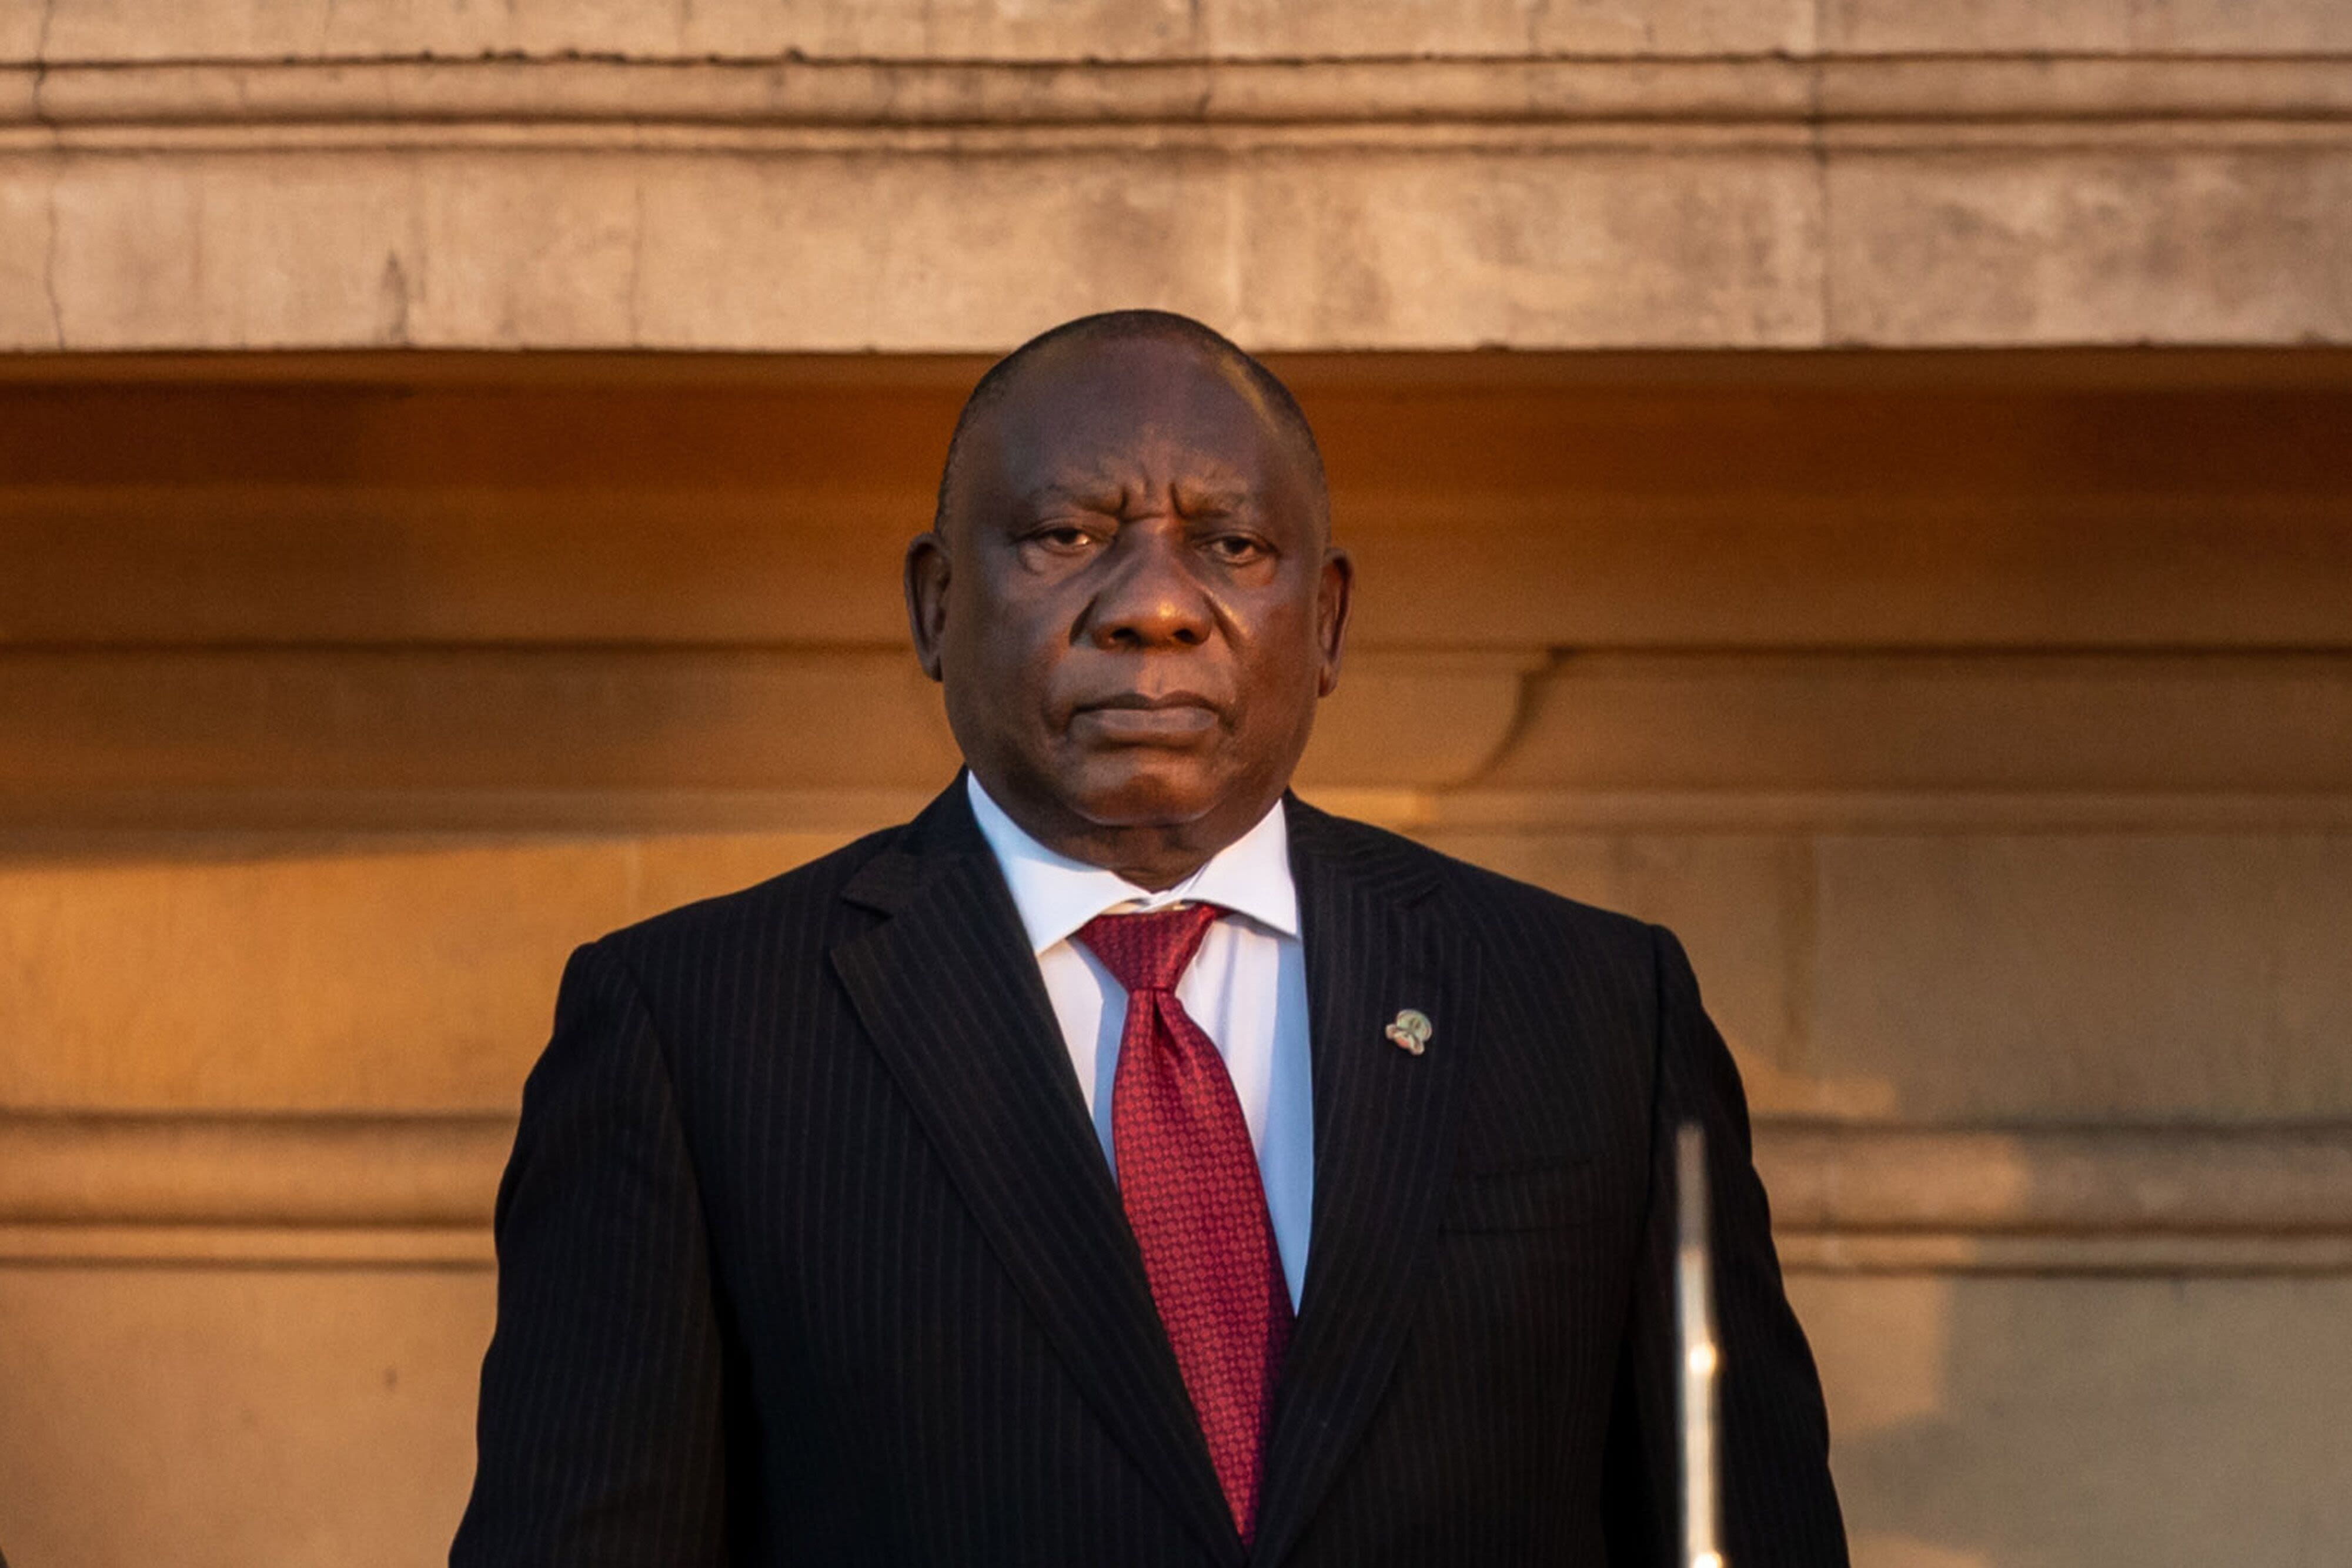 South African Leader to Sign Health Law Opposed by Business